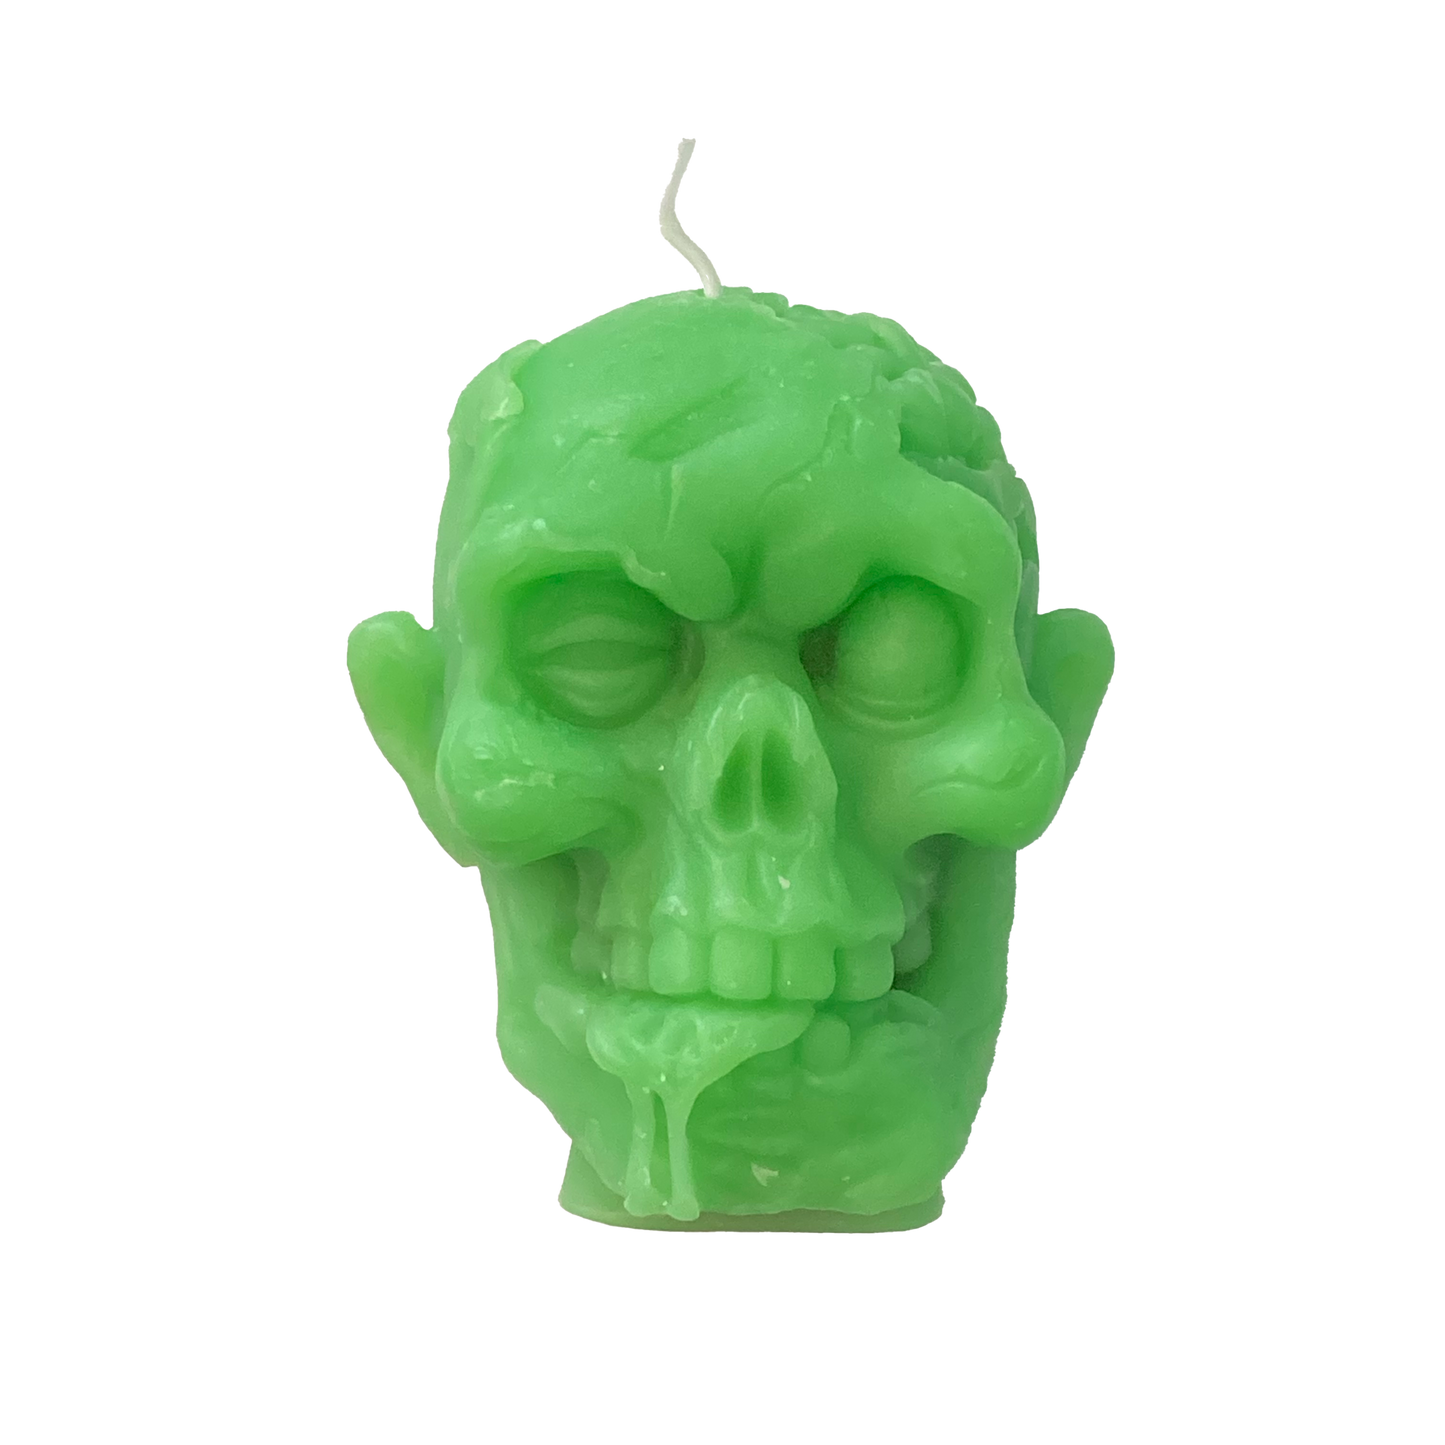 Waxing Dead Zombie Head Candle